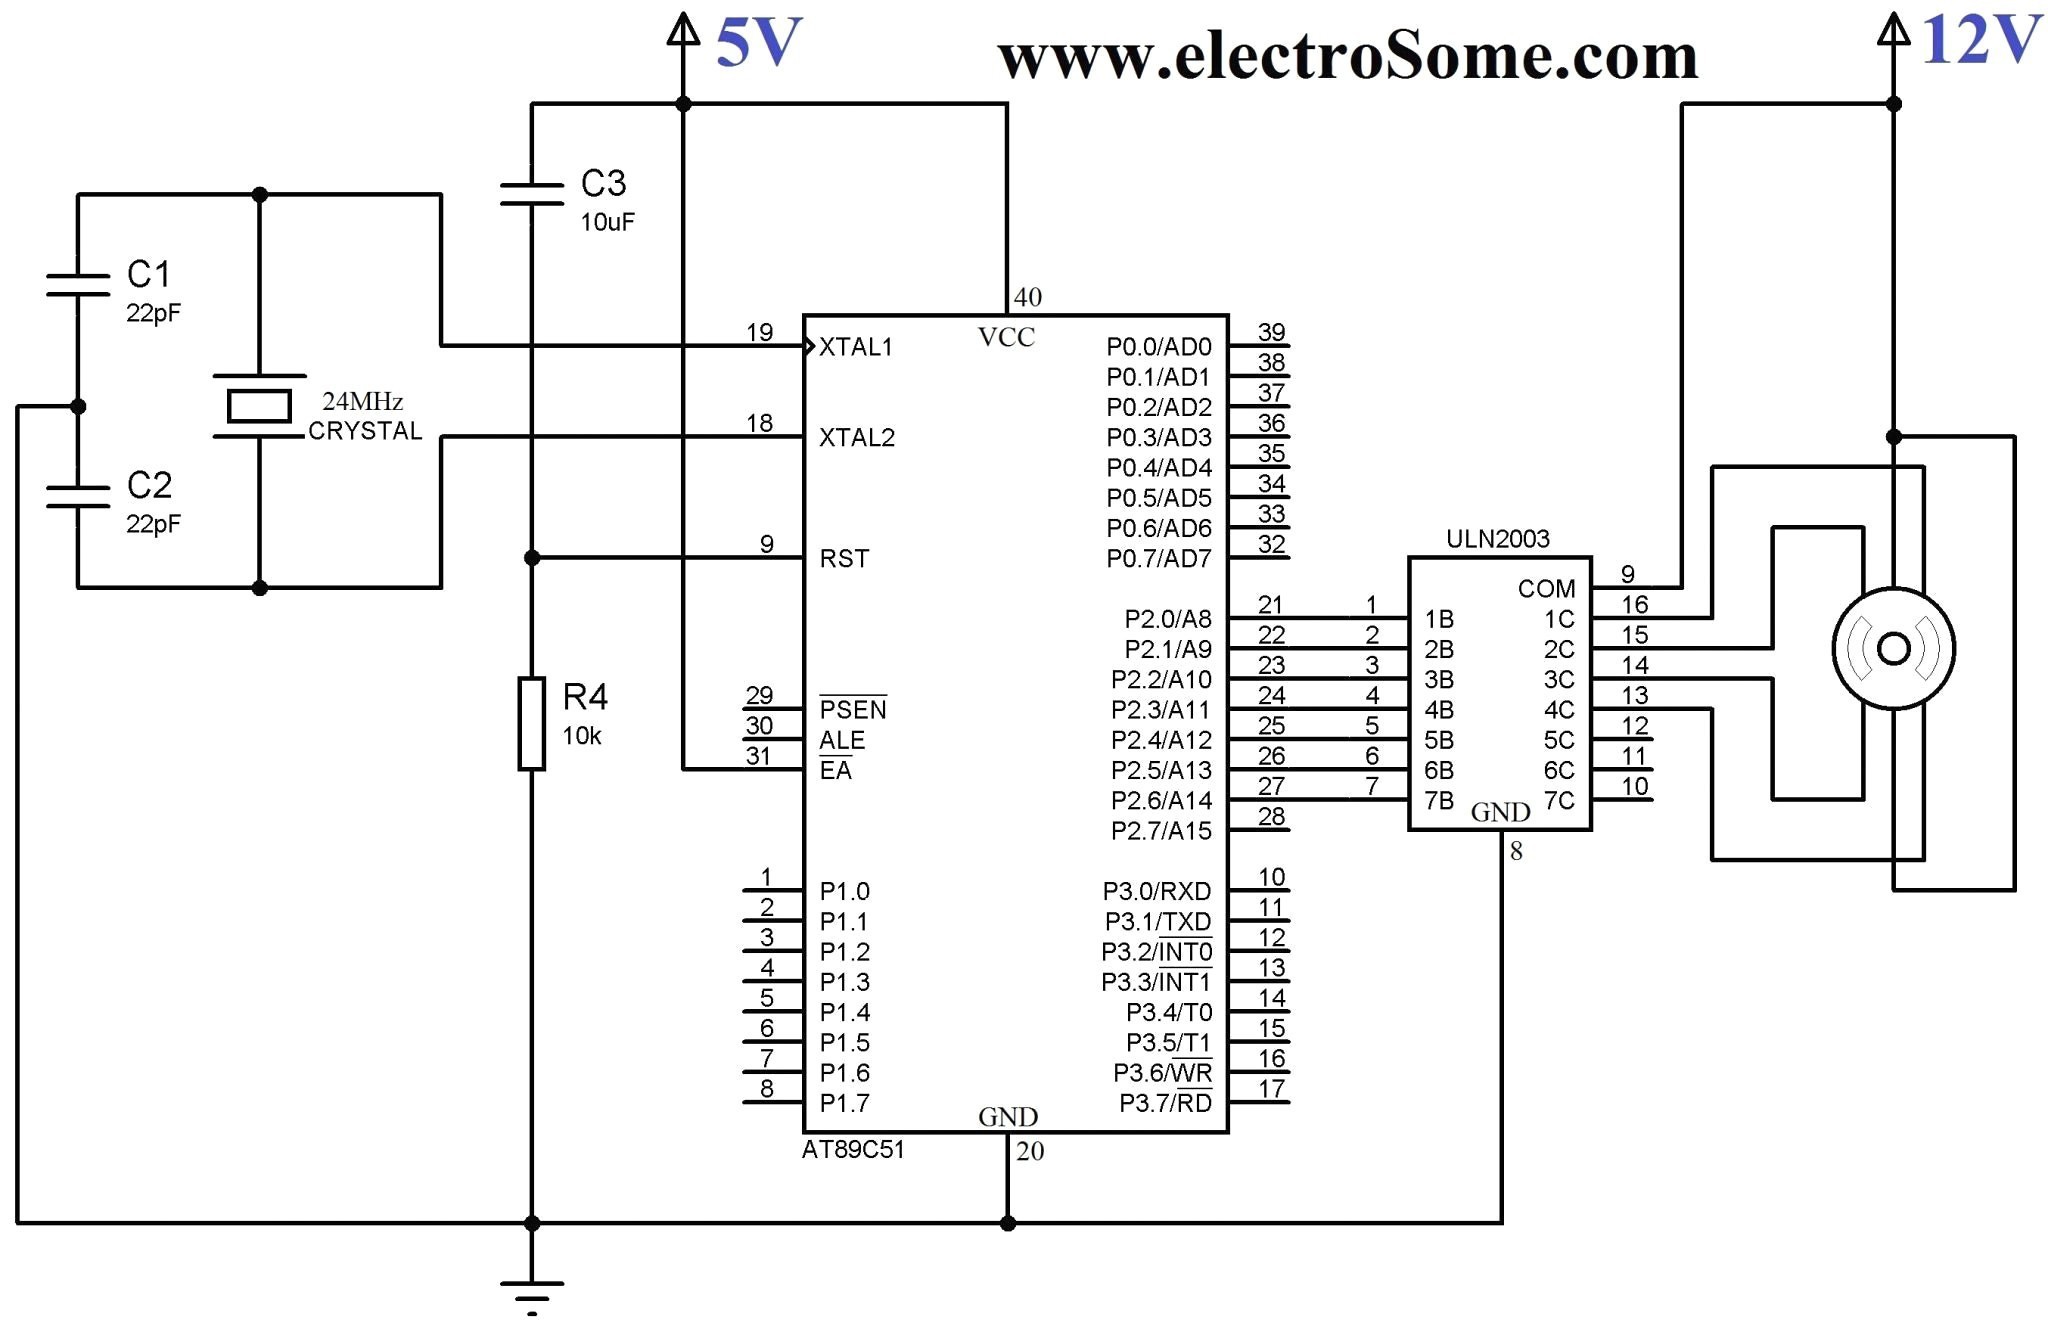 Wiring Diagram for Lighting Contactor Inspirationa Refrence Wiring Diagram Lighting Contactor